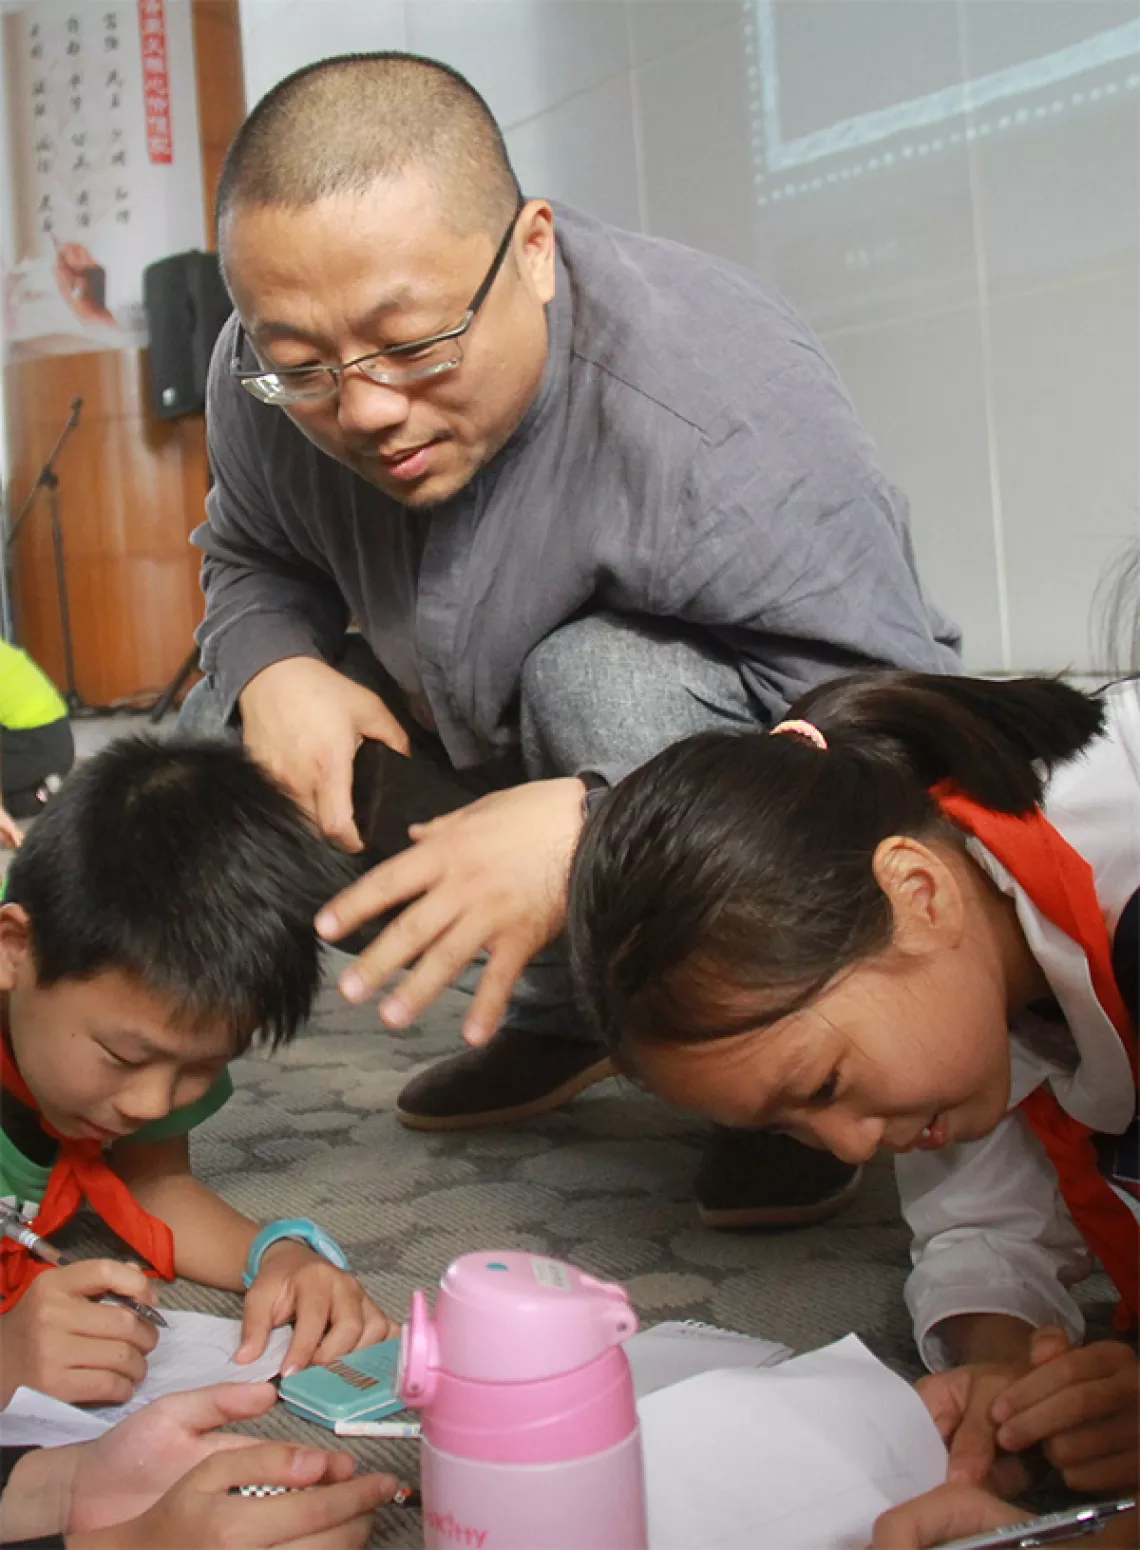 Zhang Haibo, Deputy Director of the Guangzhou Children's Palace discussing the design of a questionnaire with child researchers.